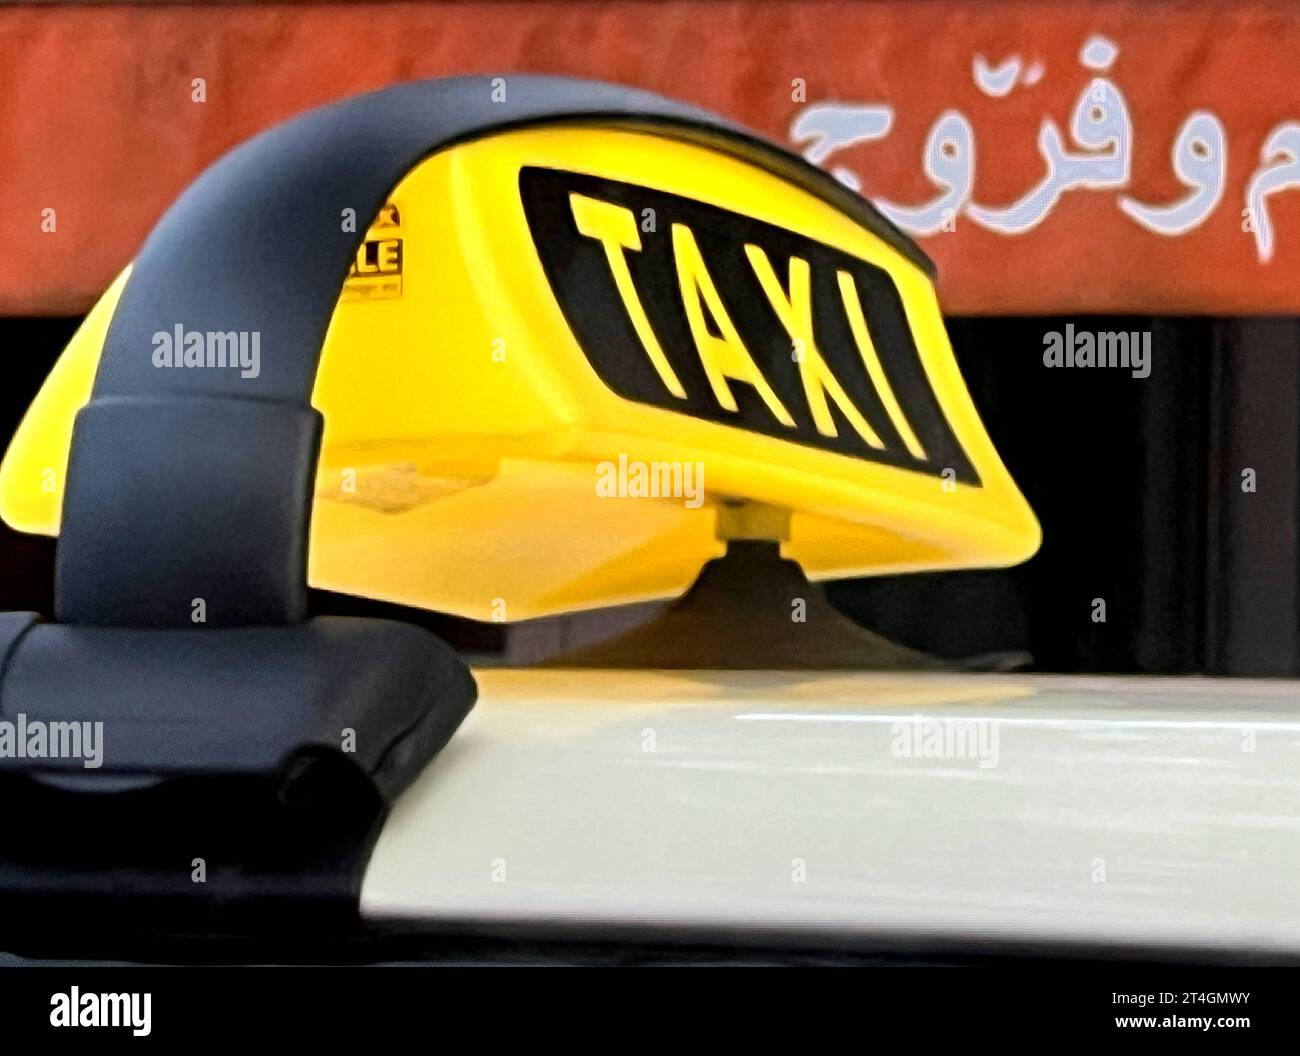 Taxi Schild, Stock Photo, Picture And Low Budget Royalty Free Image. Pic.  ESY-004776498